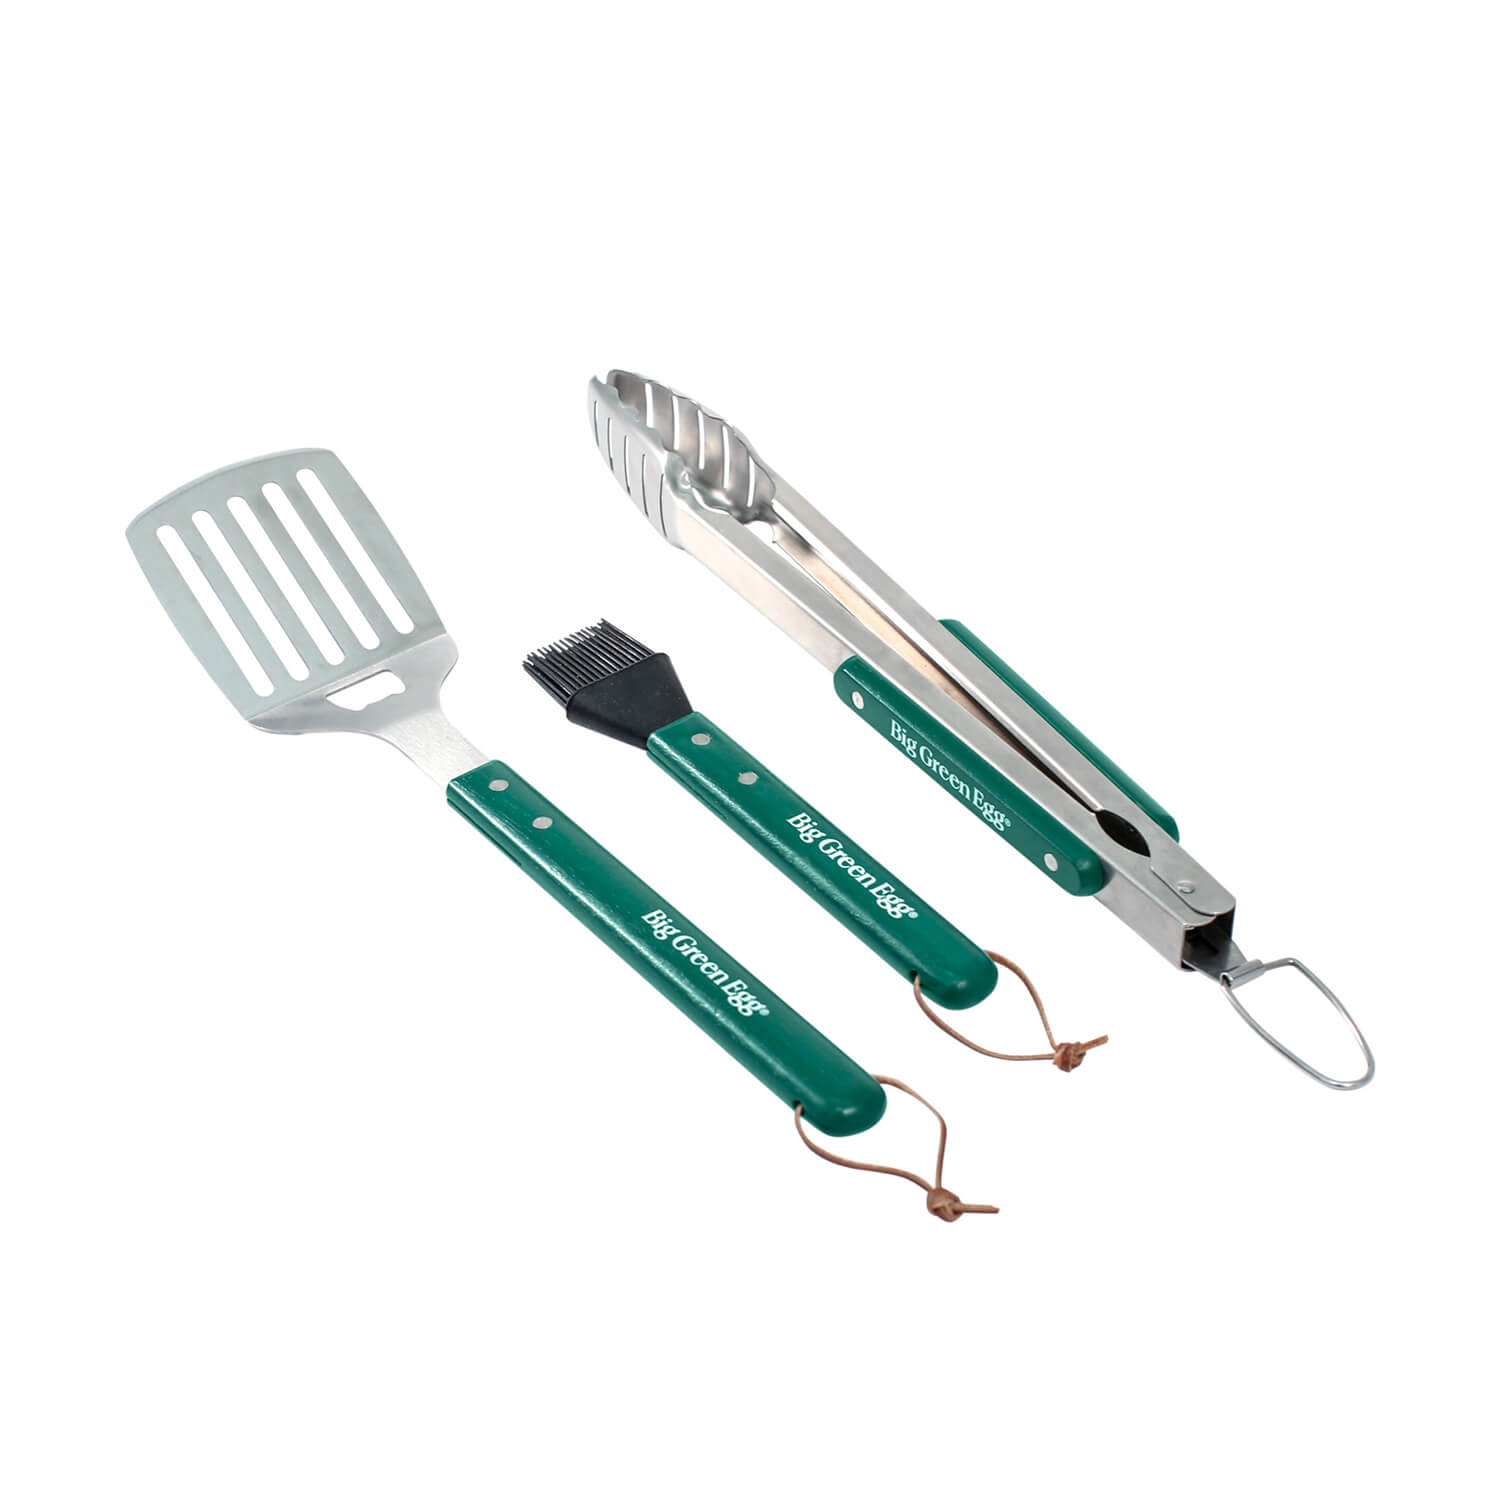 Stainless BBQ Tool Set with Wood Handles